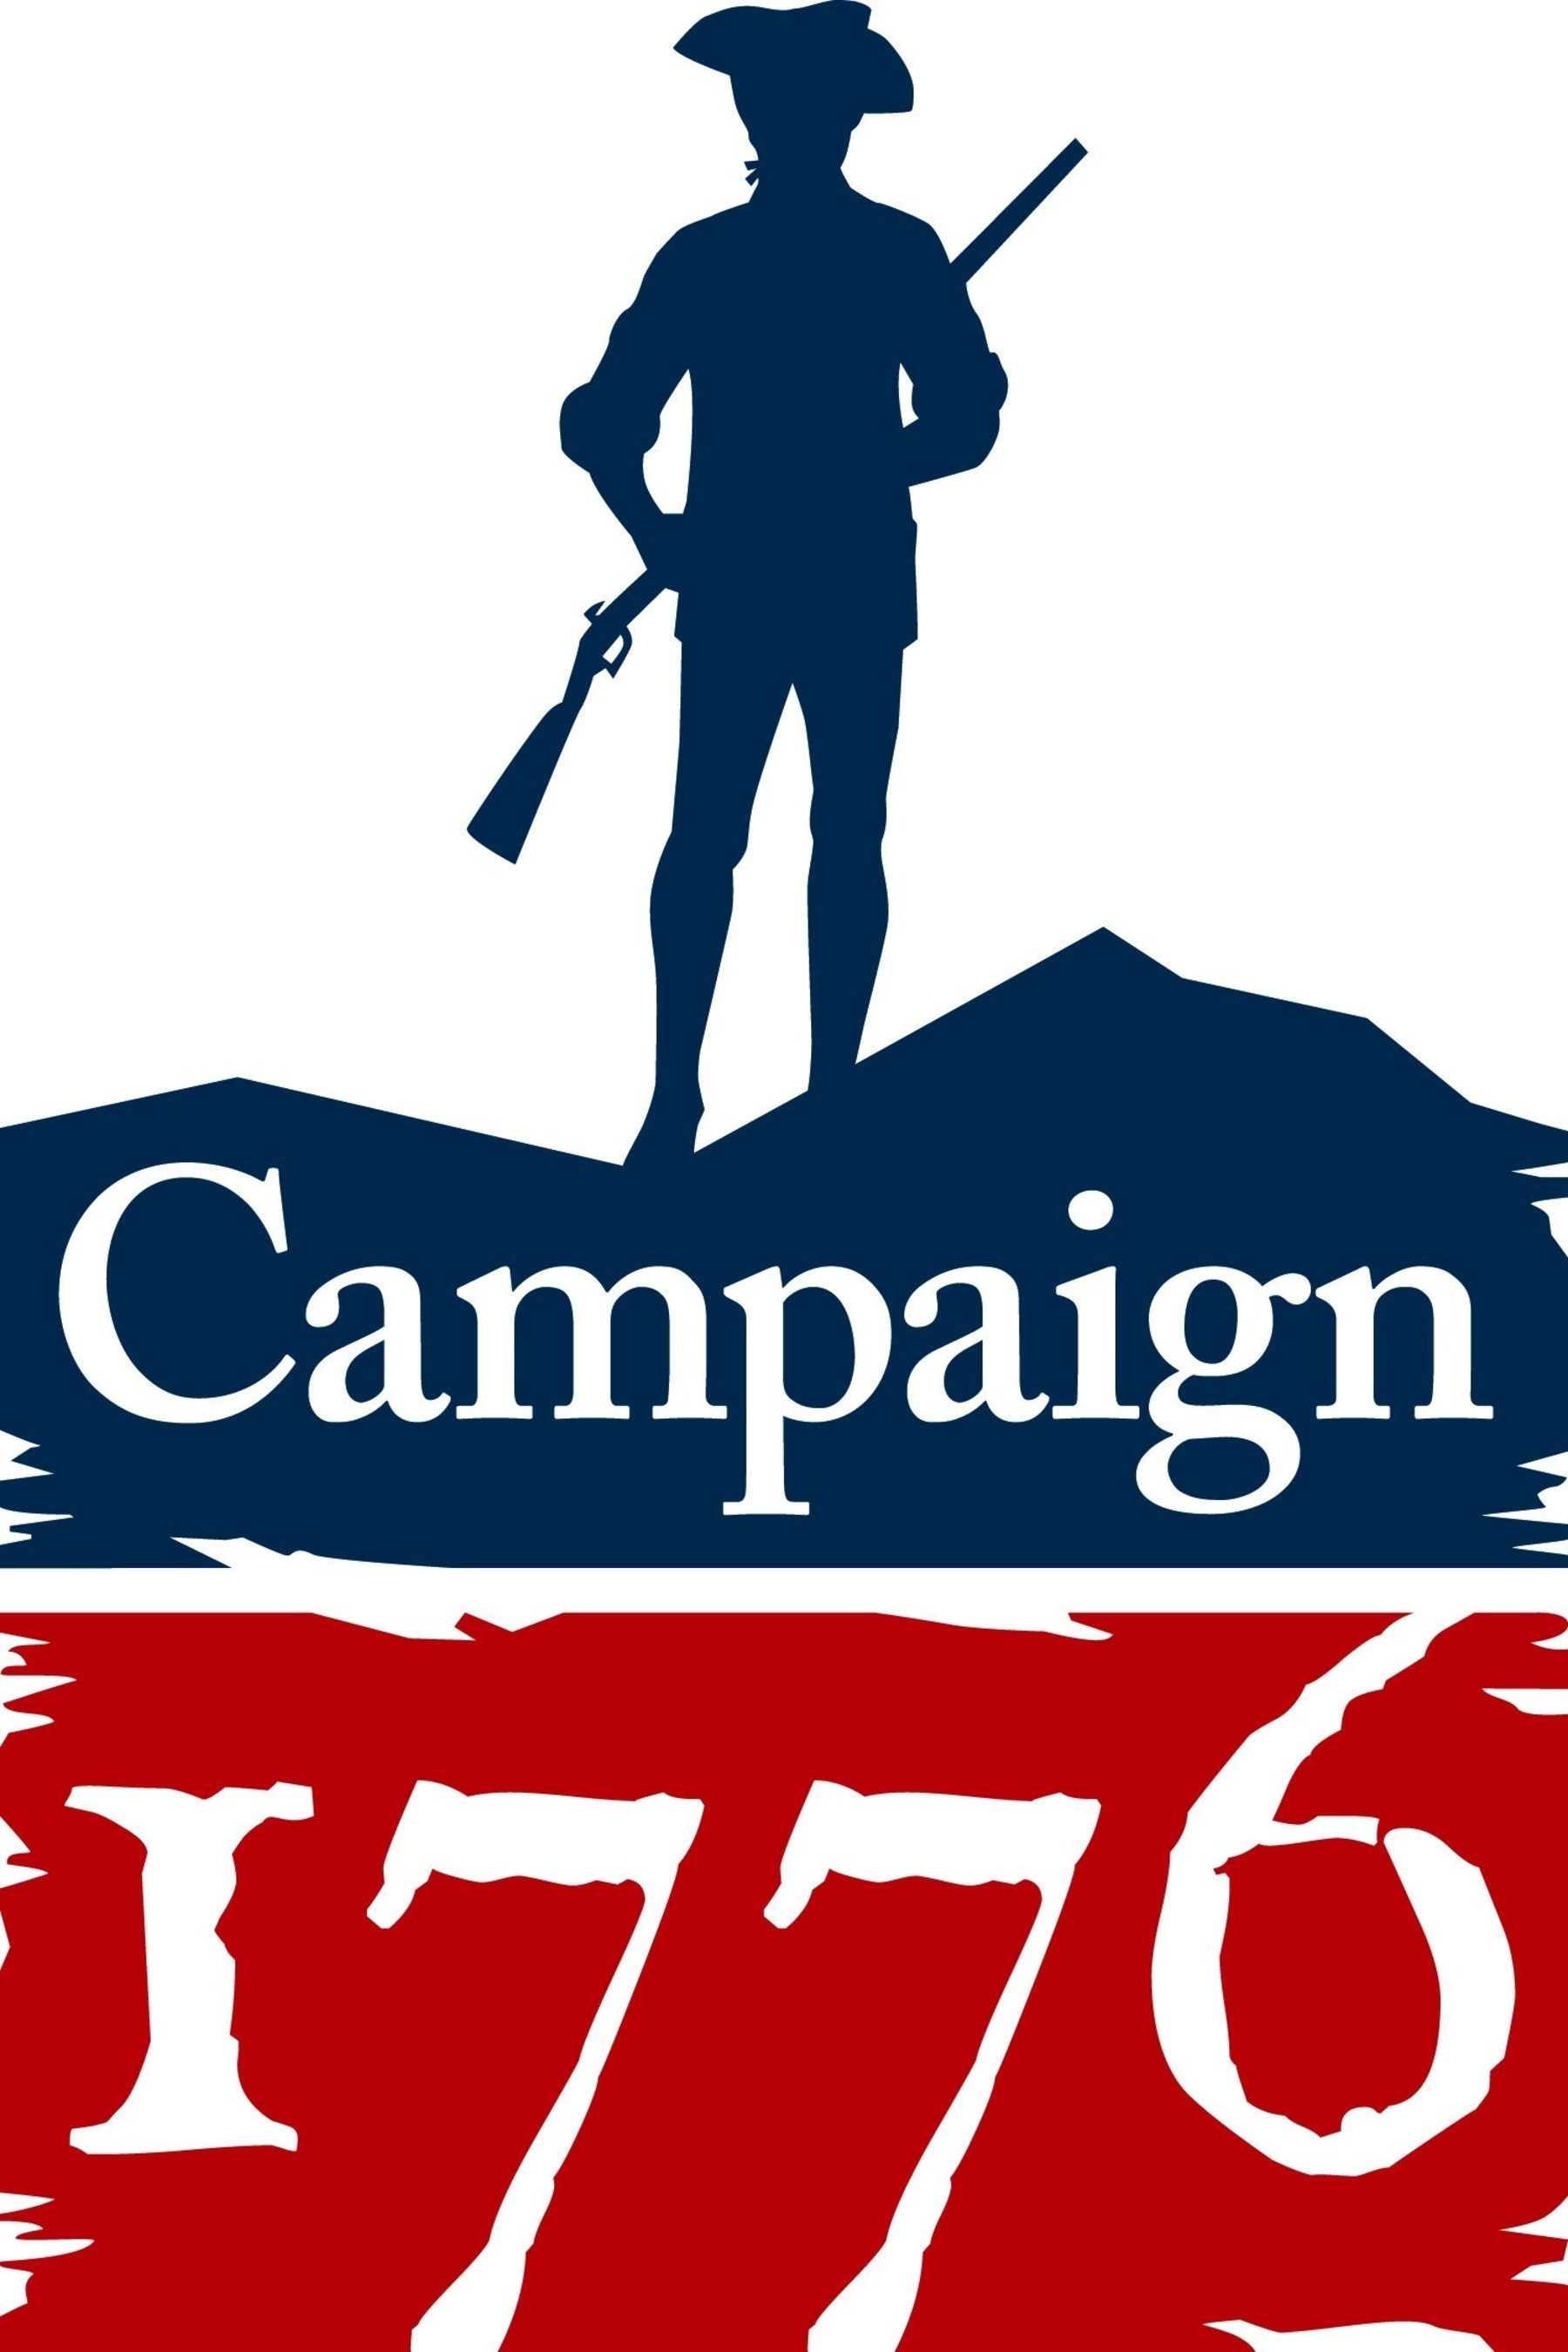 Campaign 1776 is the first-ever national initiative to protect and interpret the battlefields of the American Revolutionary War and the War of 1812.